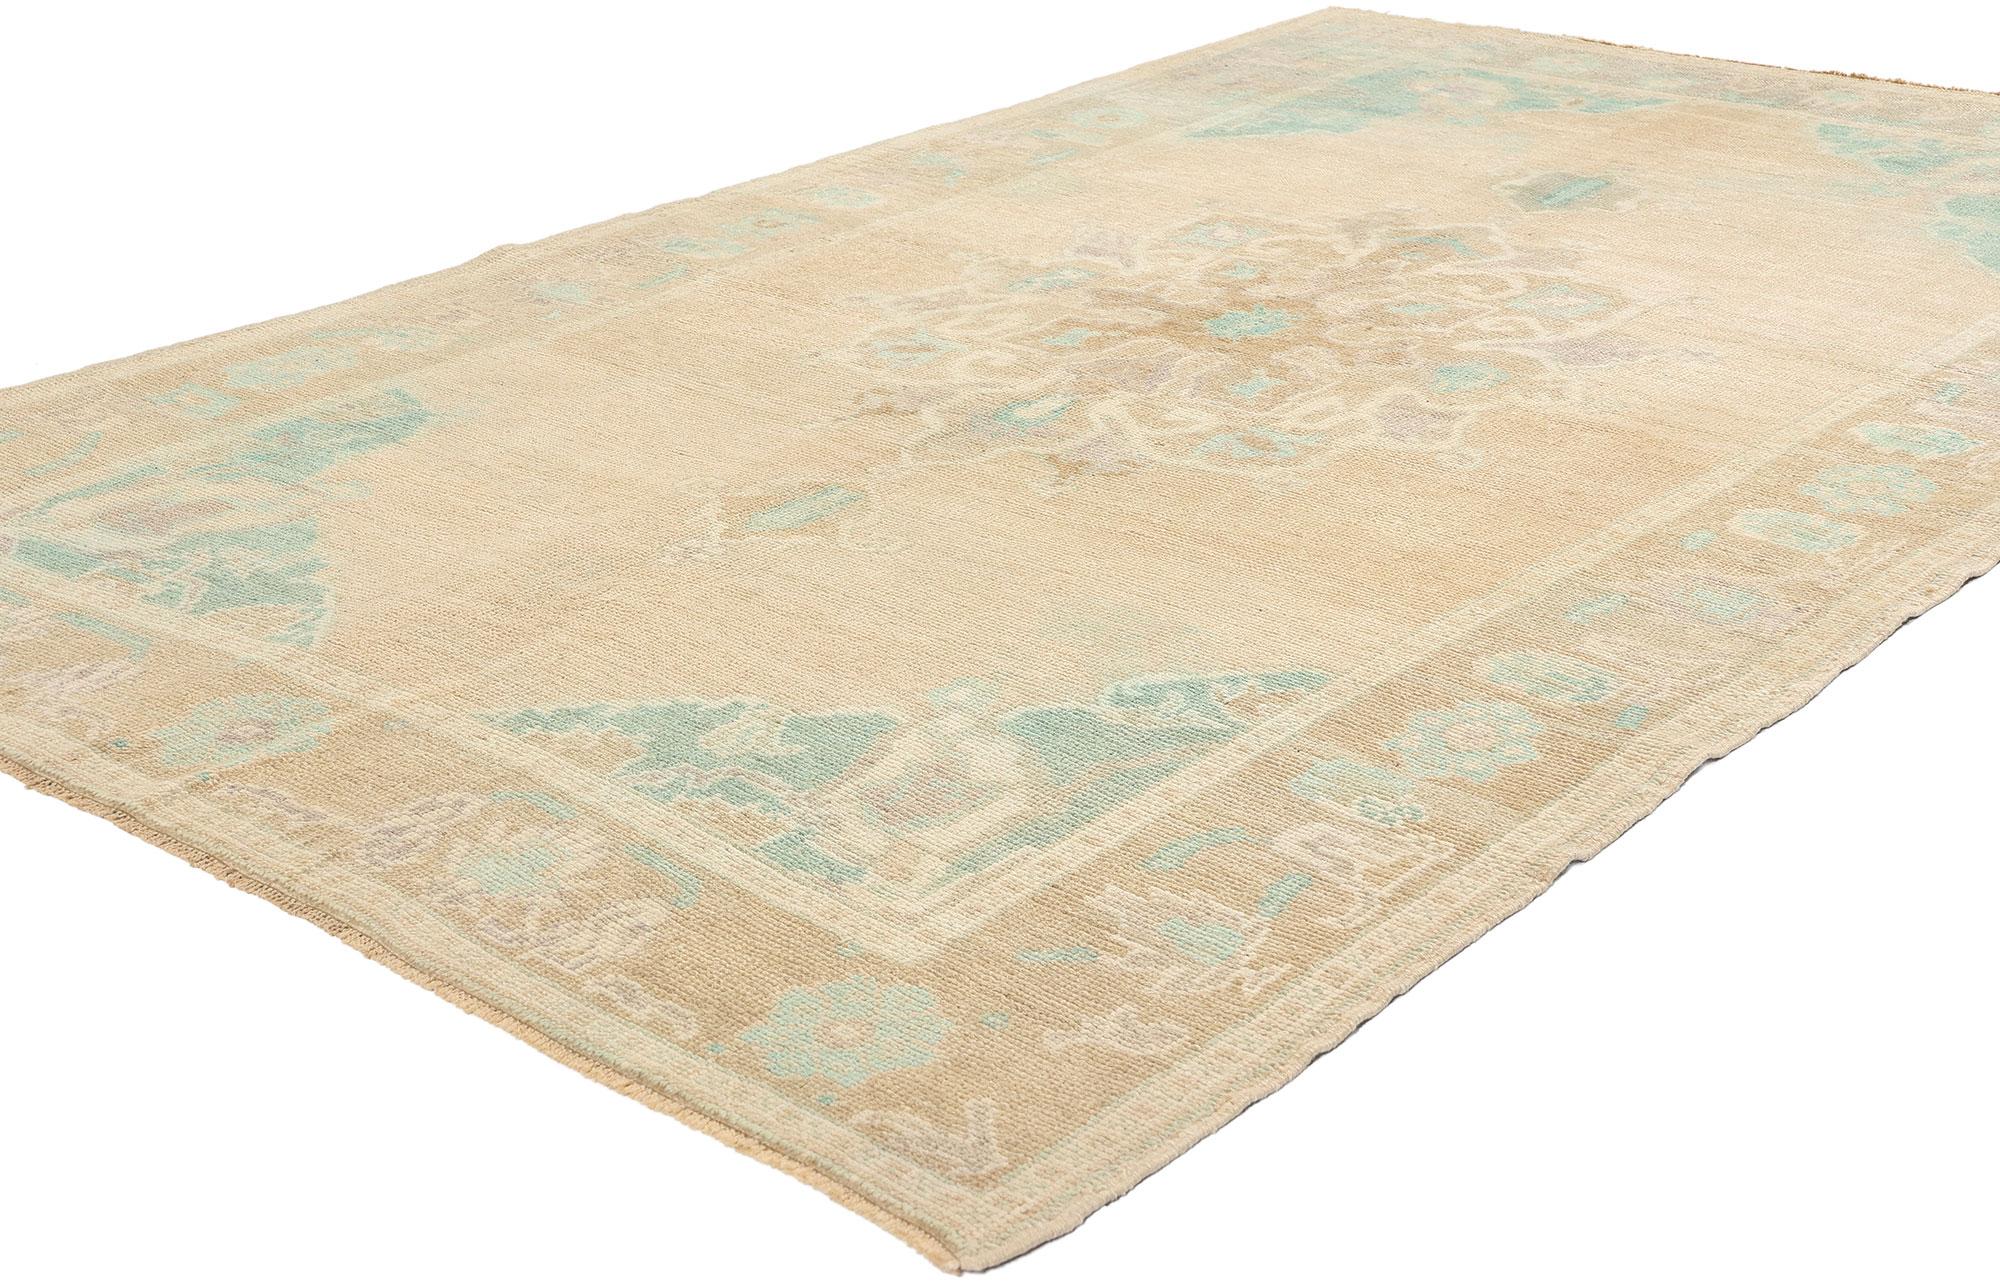 52957 Vintage Pastel Turkish Oushak Rug, 04'08 x 07'06. Turkish Oushak rugs, antique-washed and adorned with subdued pastel earth-tone colors, undergo a meticulous washing process that carefully preserves the texture and integrity of their pile.